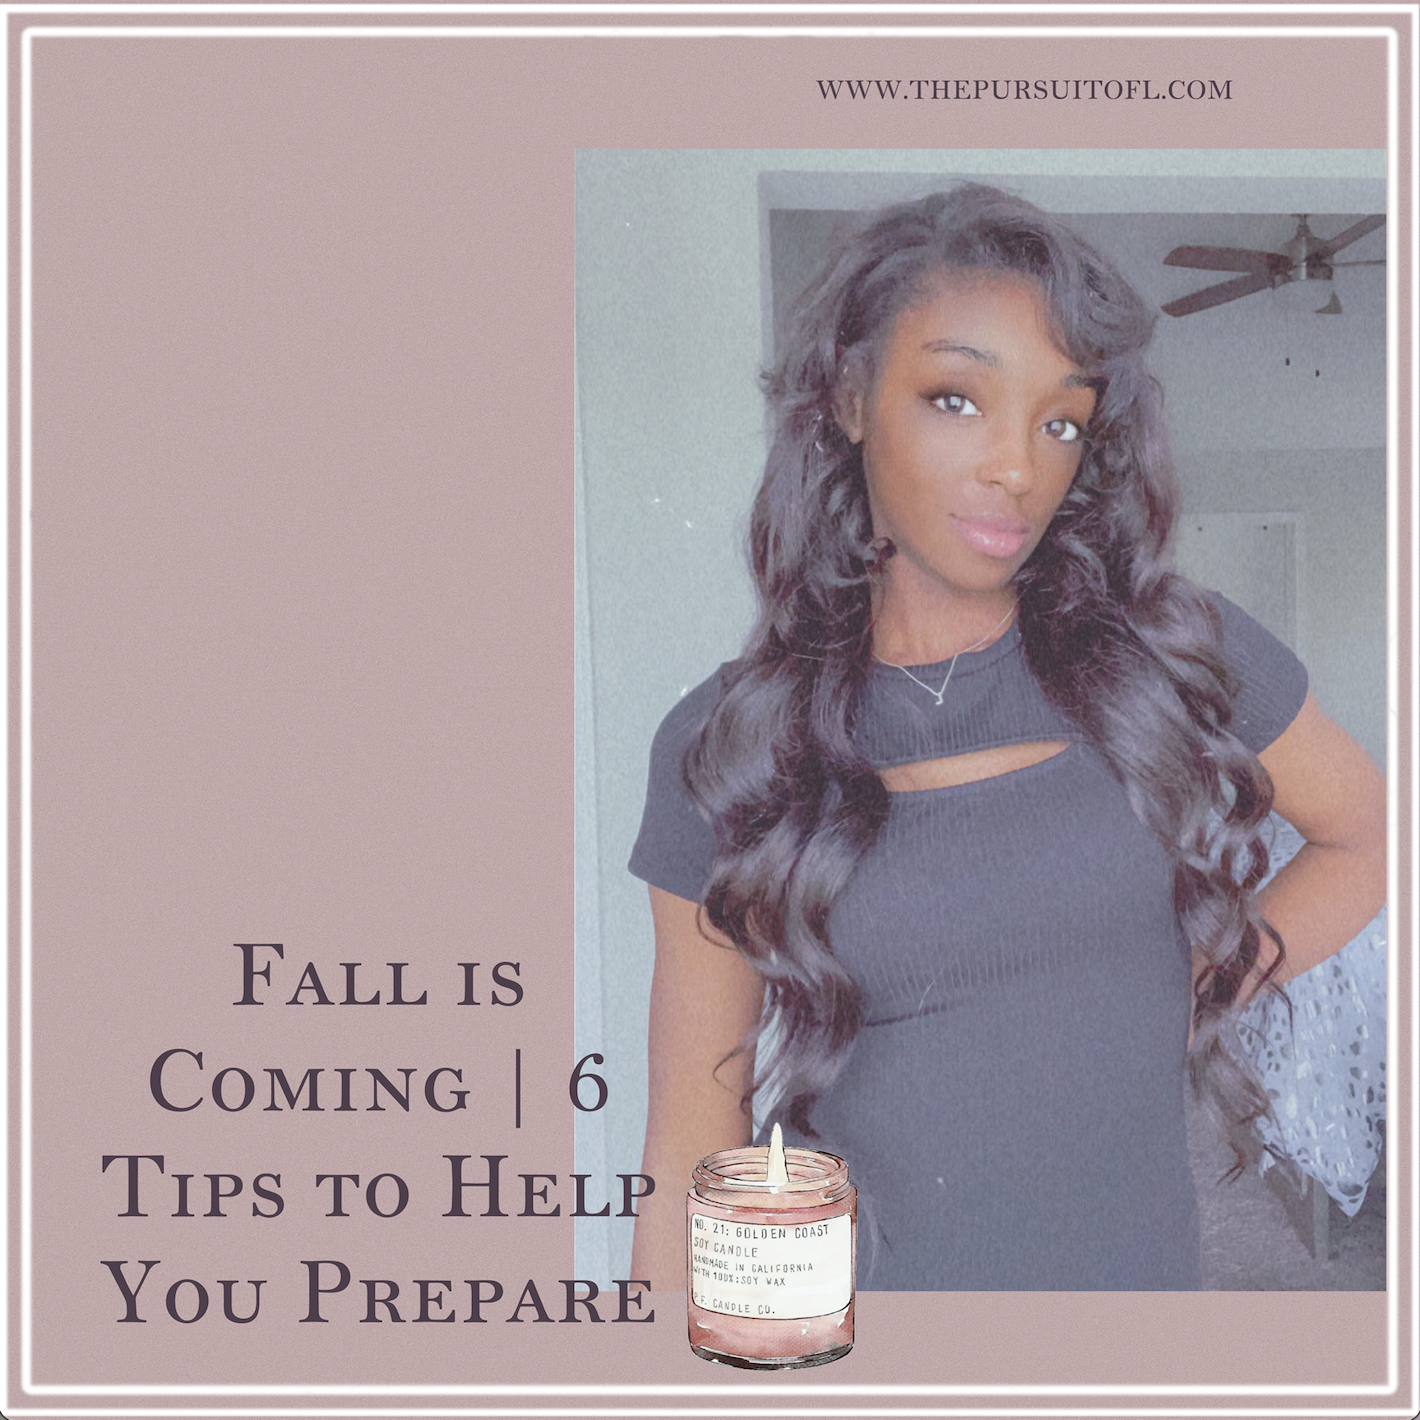 Fall is Coming | 6 Tips to Help You Prepare